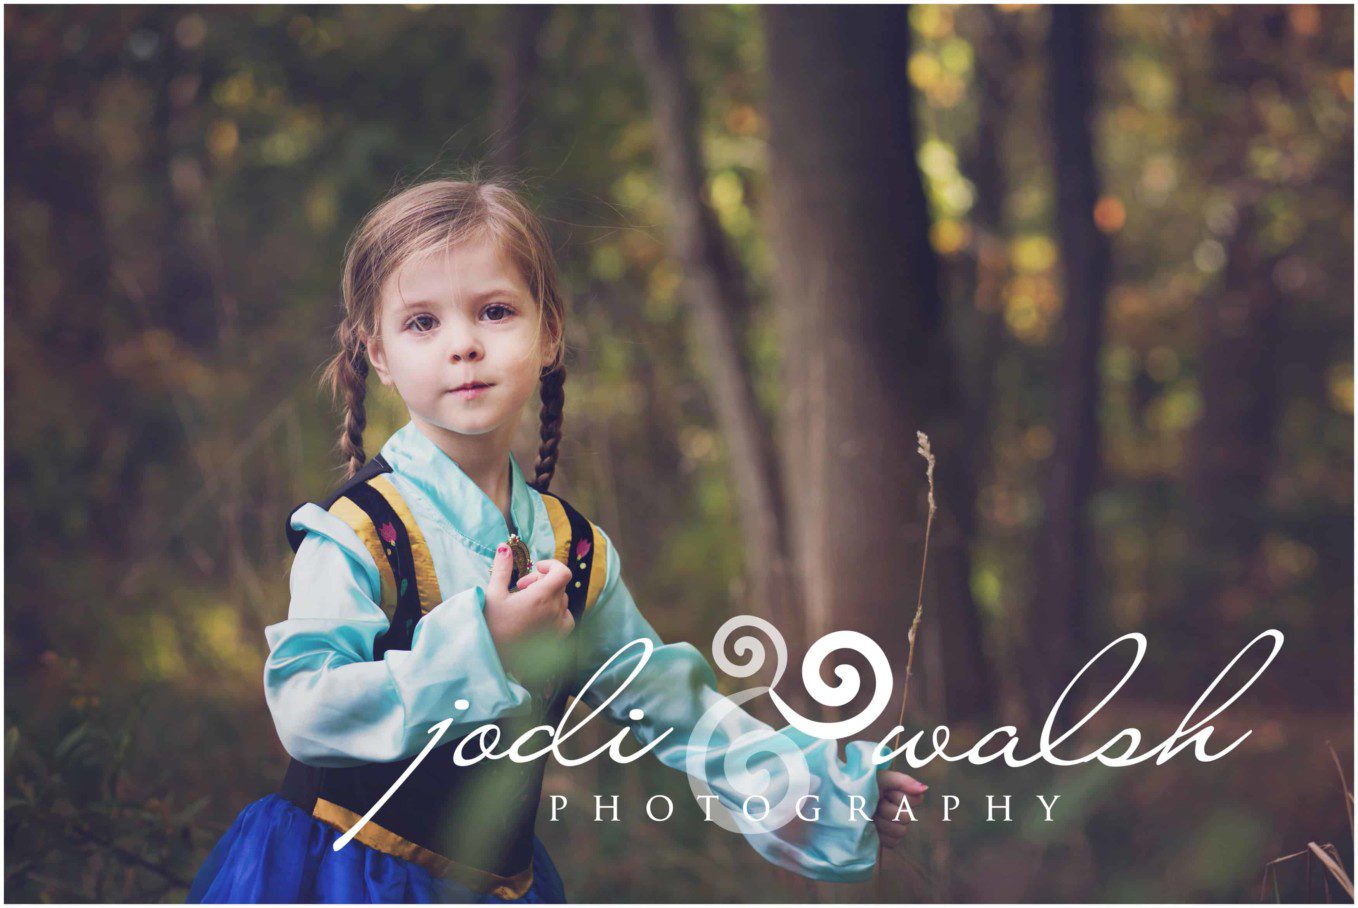 little girl dressed as Princess Anna from Frozen, fall Storybook portrait session